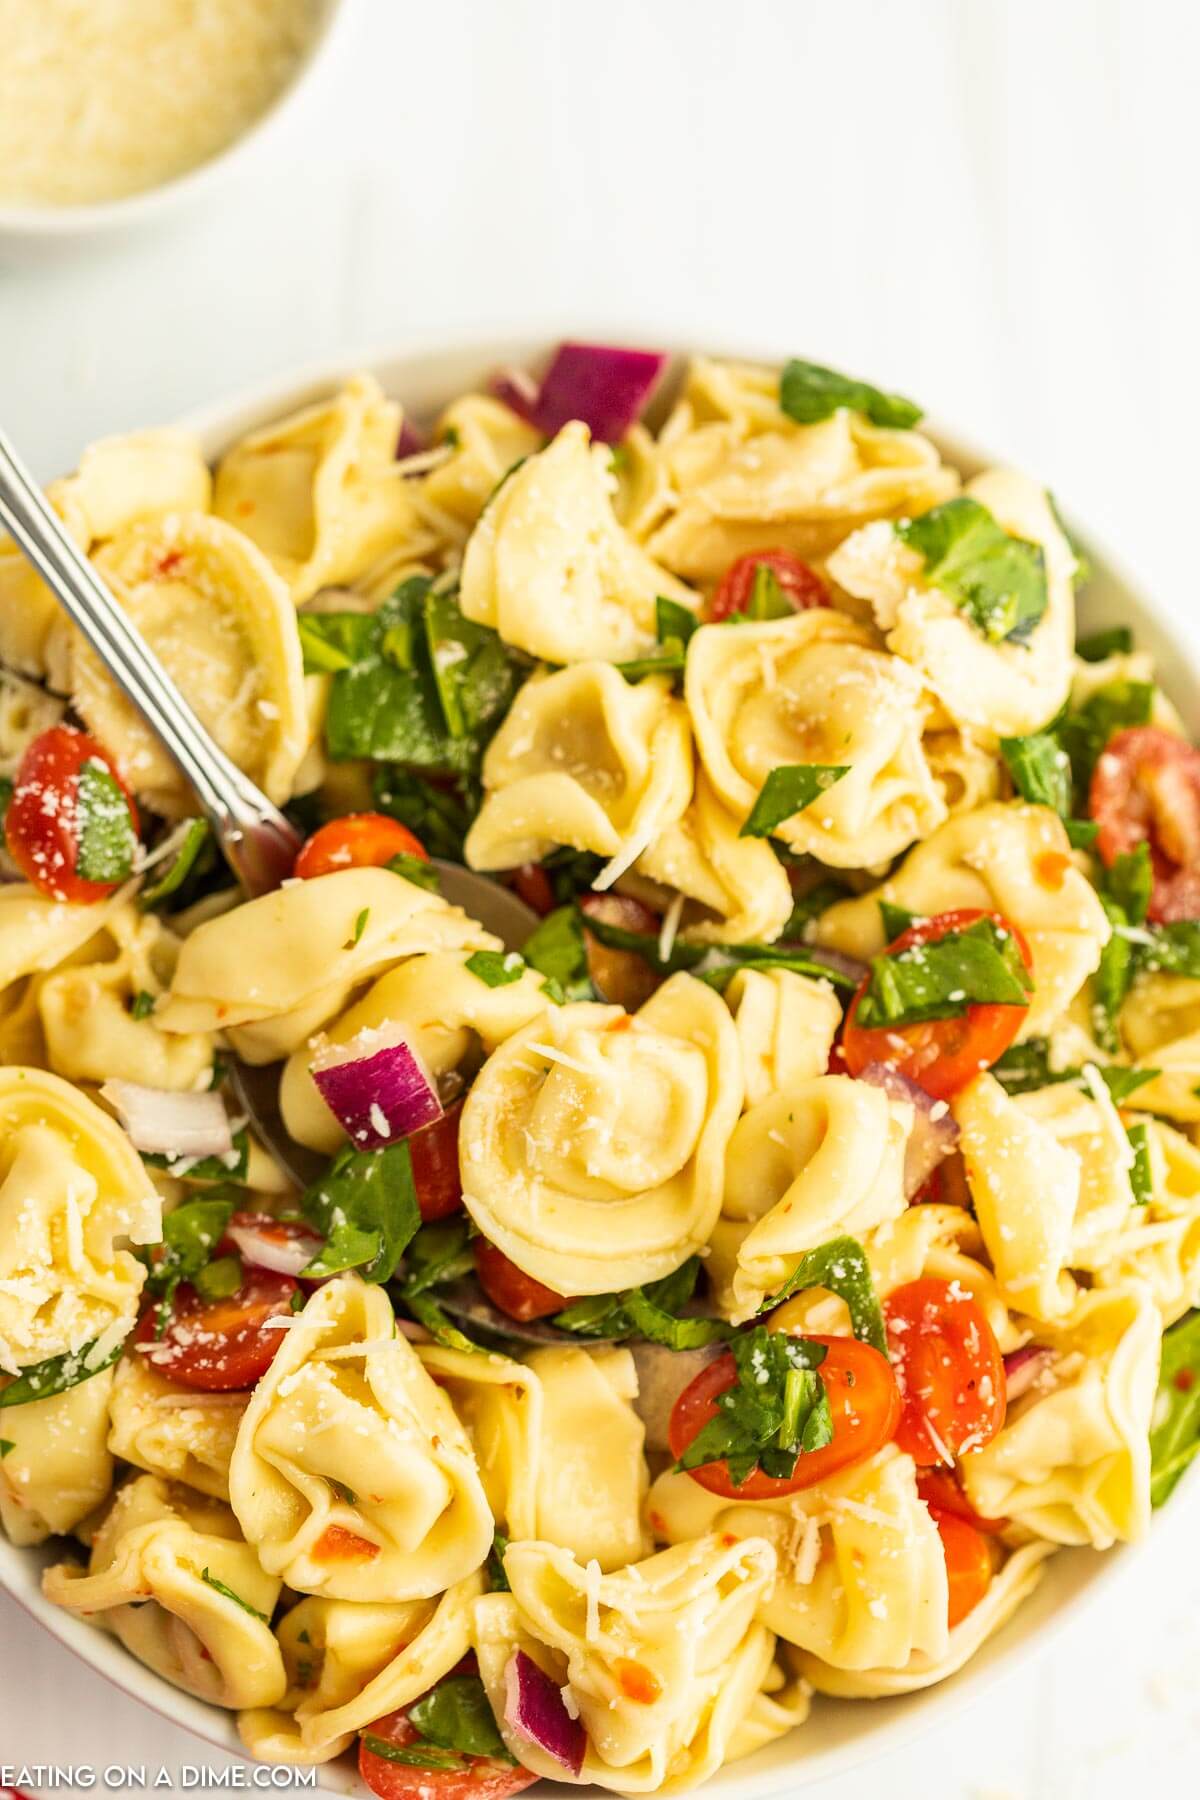 Bowl of Tortellini Pasta Salad with a serving on a spoon